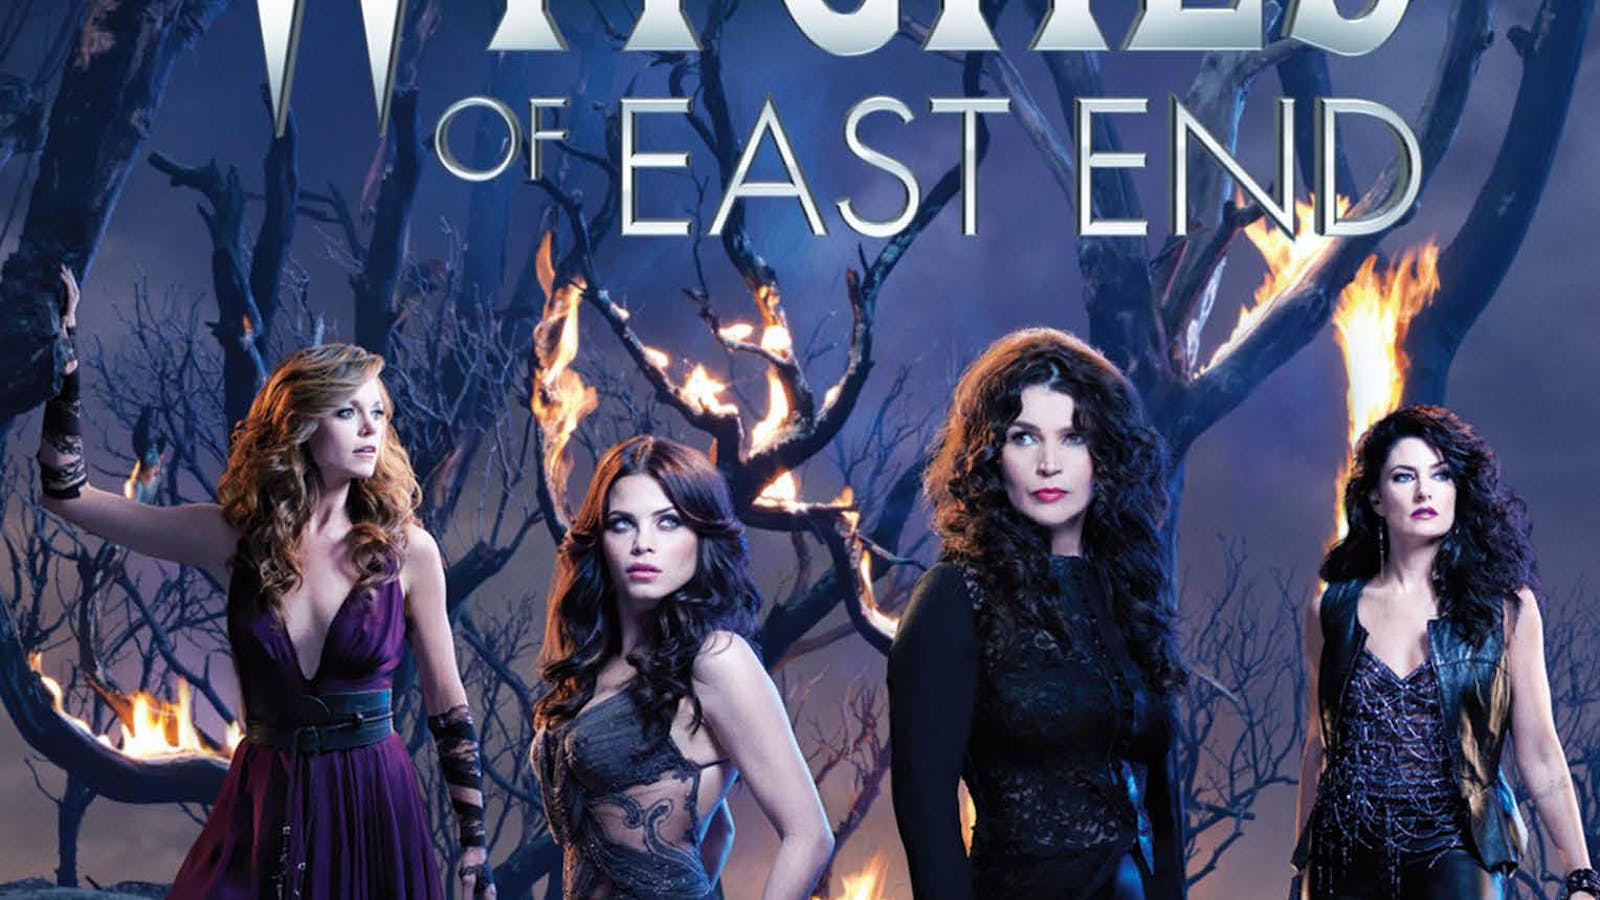 Witches Of East End Wallpapers